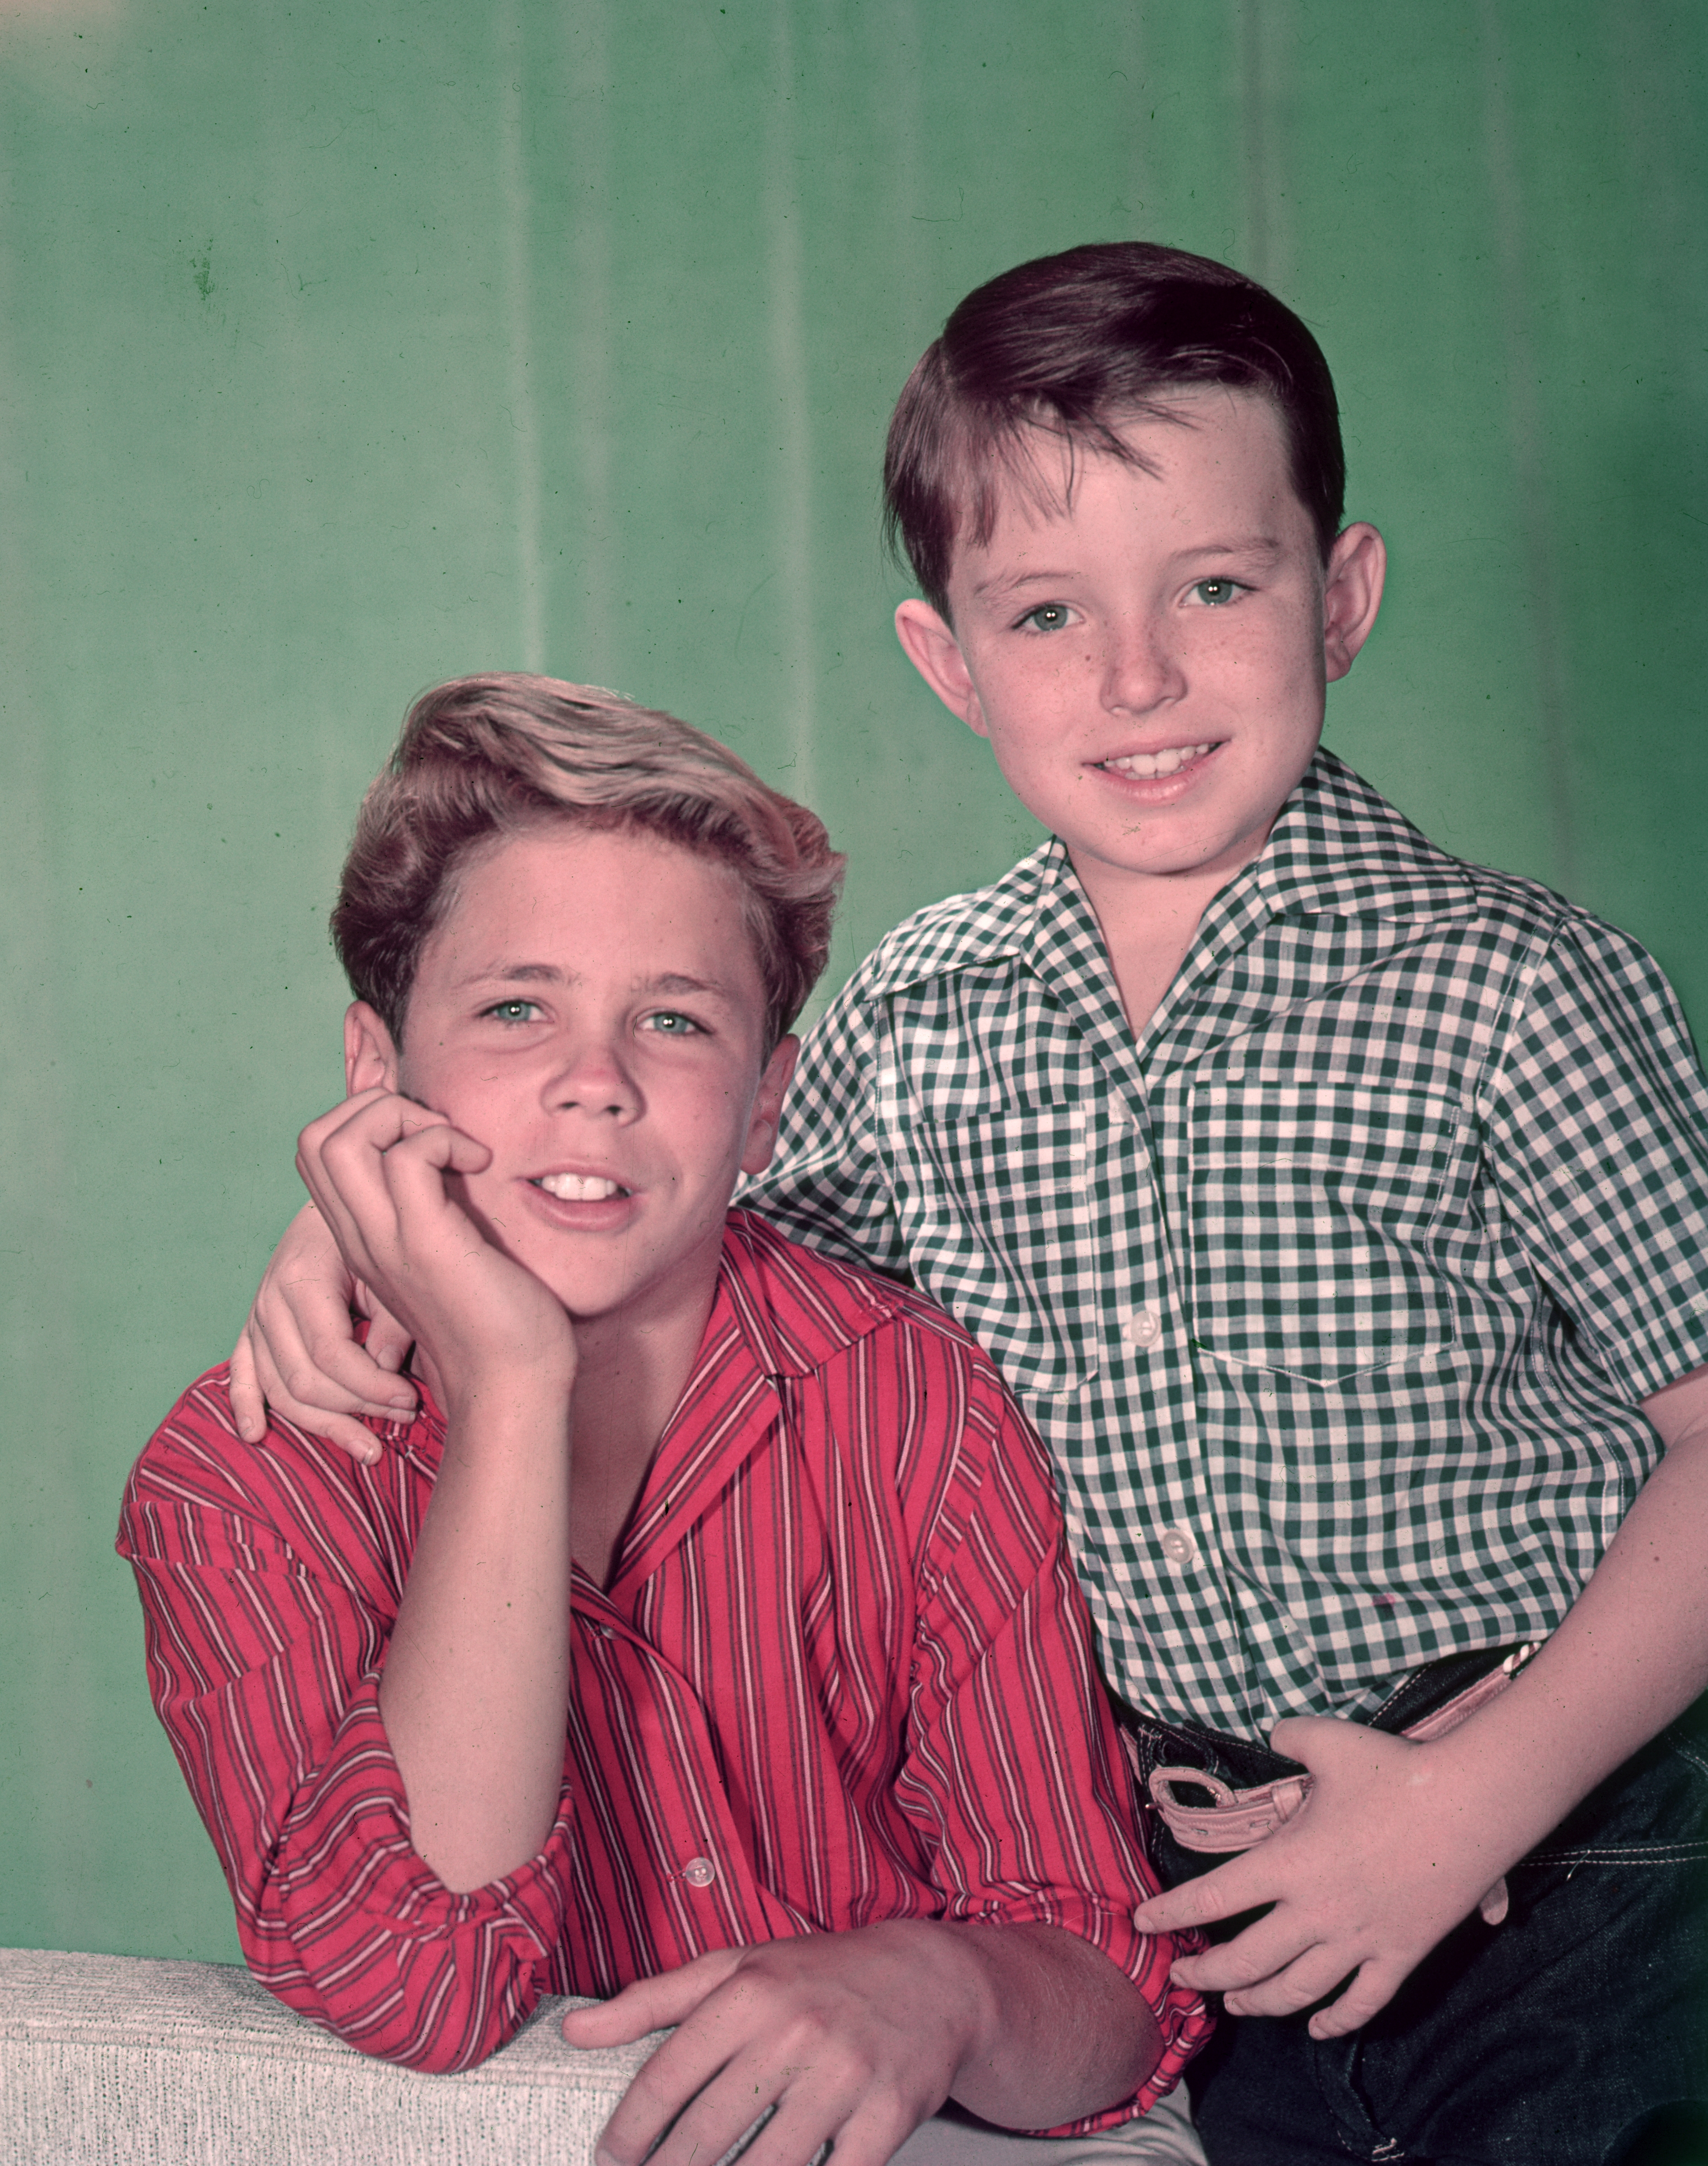 Tony Dow and Jerry Mathers promotional portrait for “Leave It to Beaver” in 1955 | Source: Getty Images